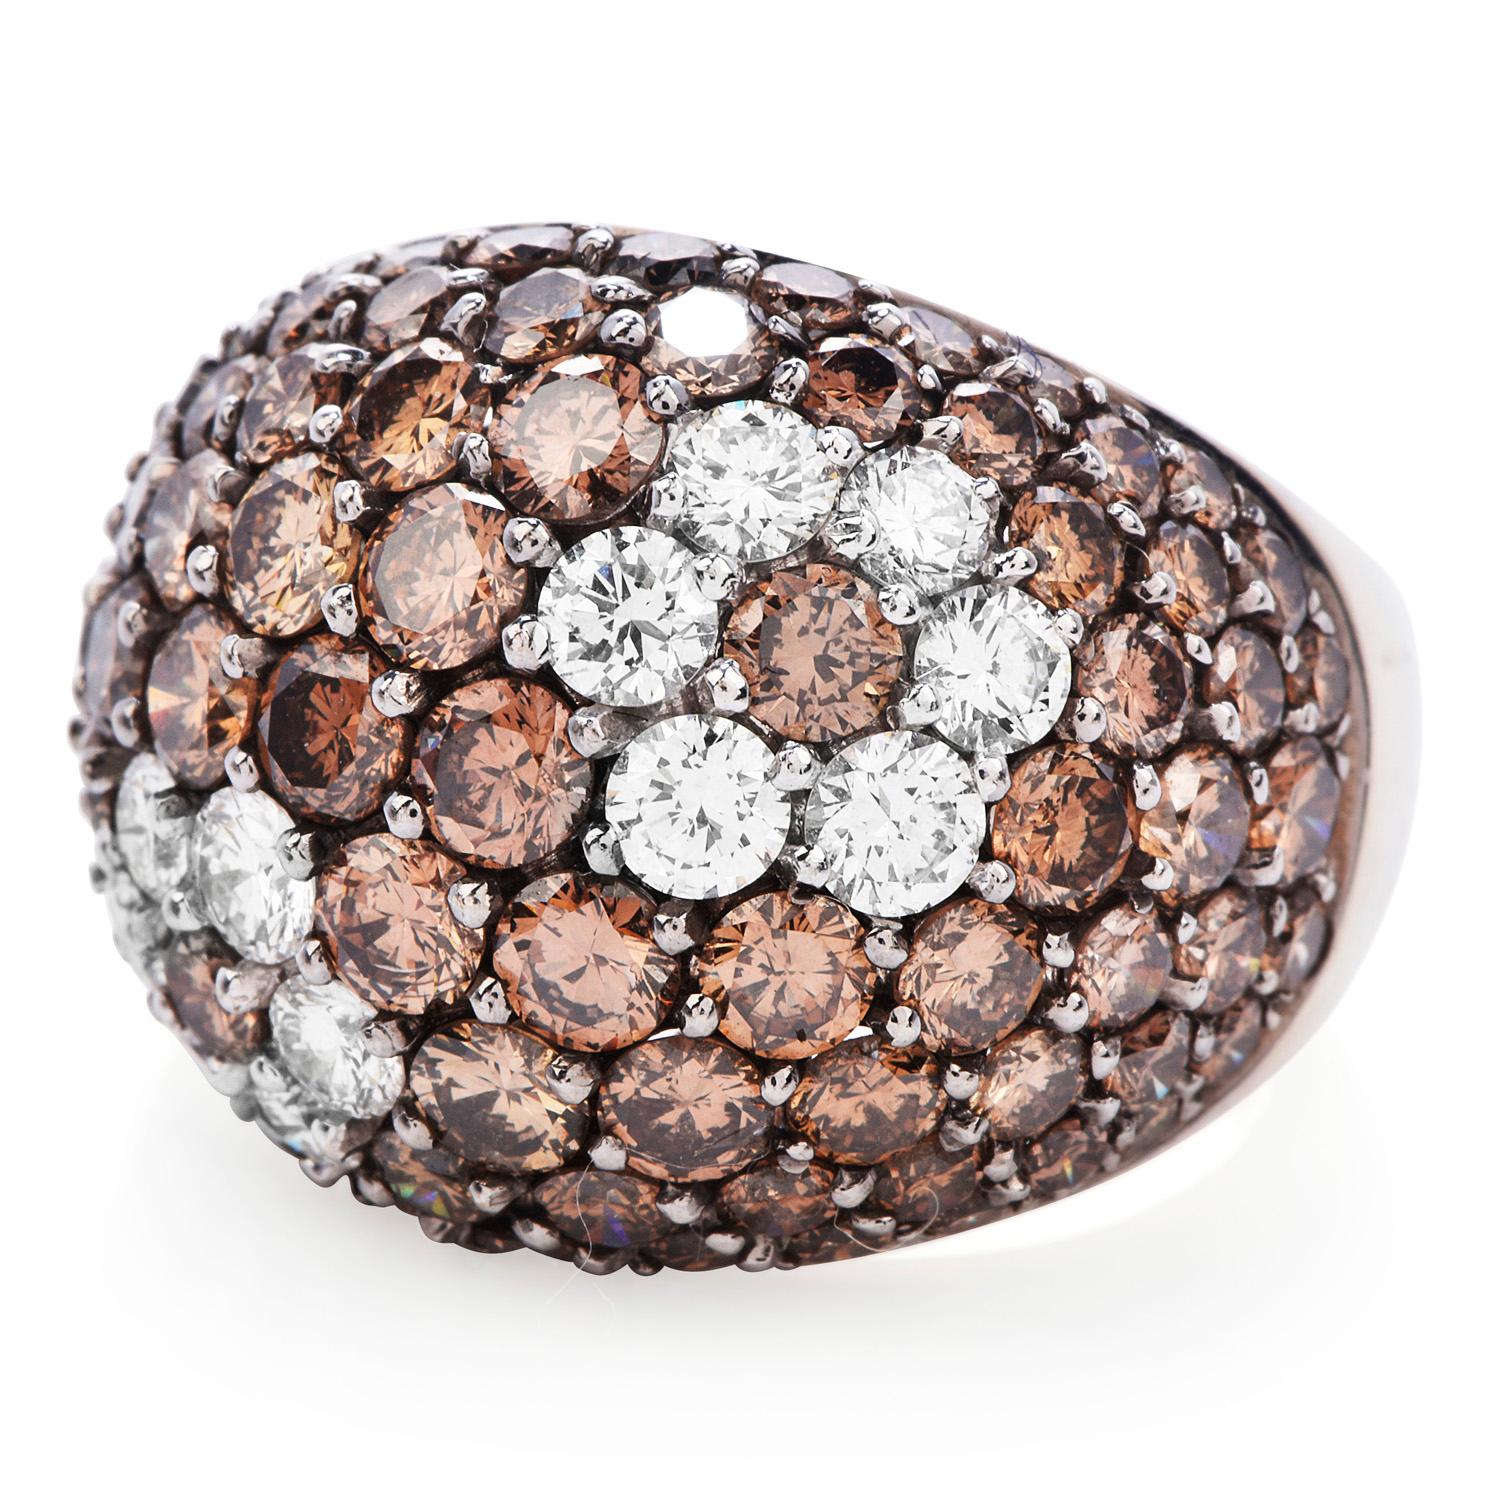 Exquisite Botanical-Inspired Fancy Wide Dome Cocktail Ring is adorned by

83 Natural Fancy Brown Orange Round Cut Diamonds expertly placed

throughout the Dome shape band.  A total 7.00-carat weight,  VS-SI Clarity and 

12 Vibrant, Genuine Round